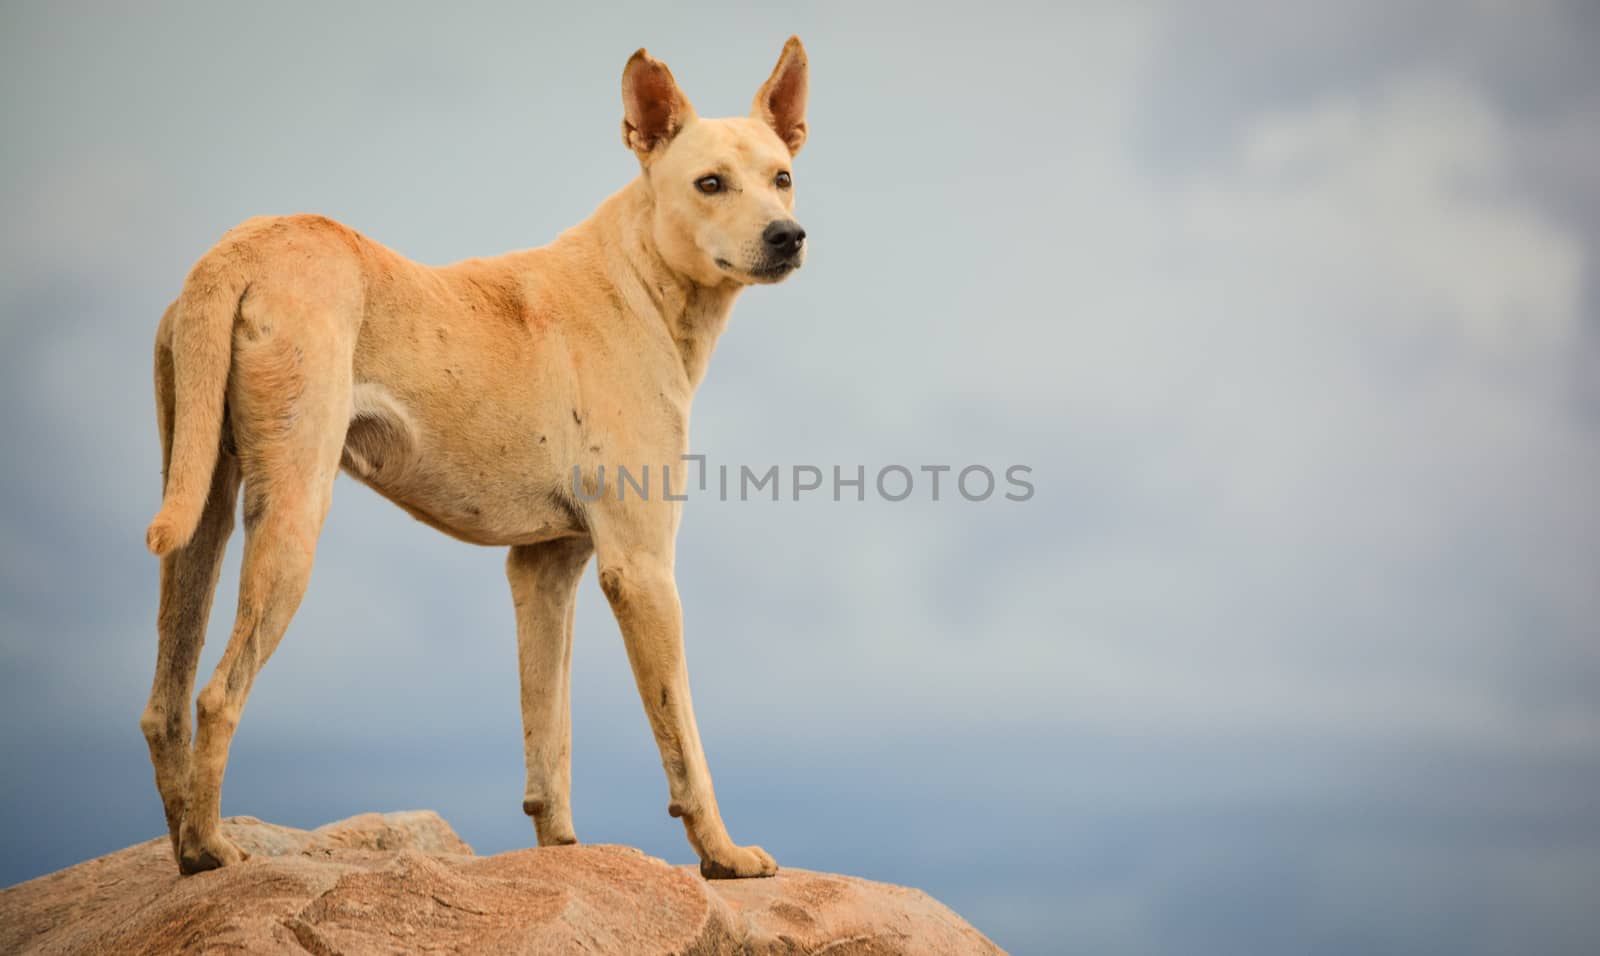 Dog standing high in the mountains searching for his owner taken during rainy season evening.